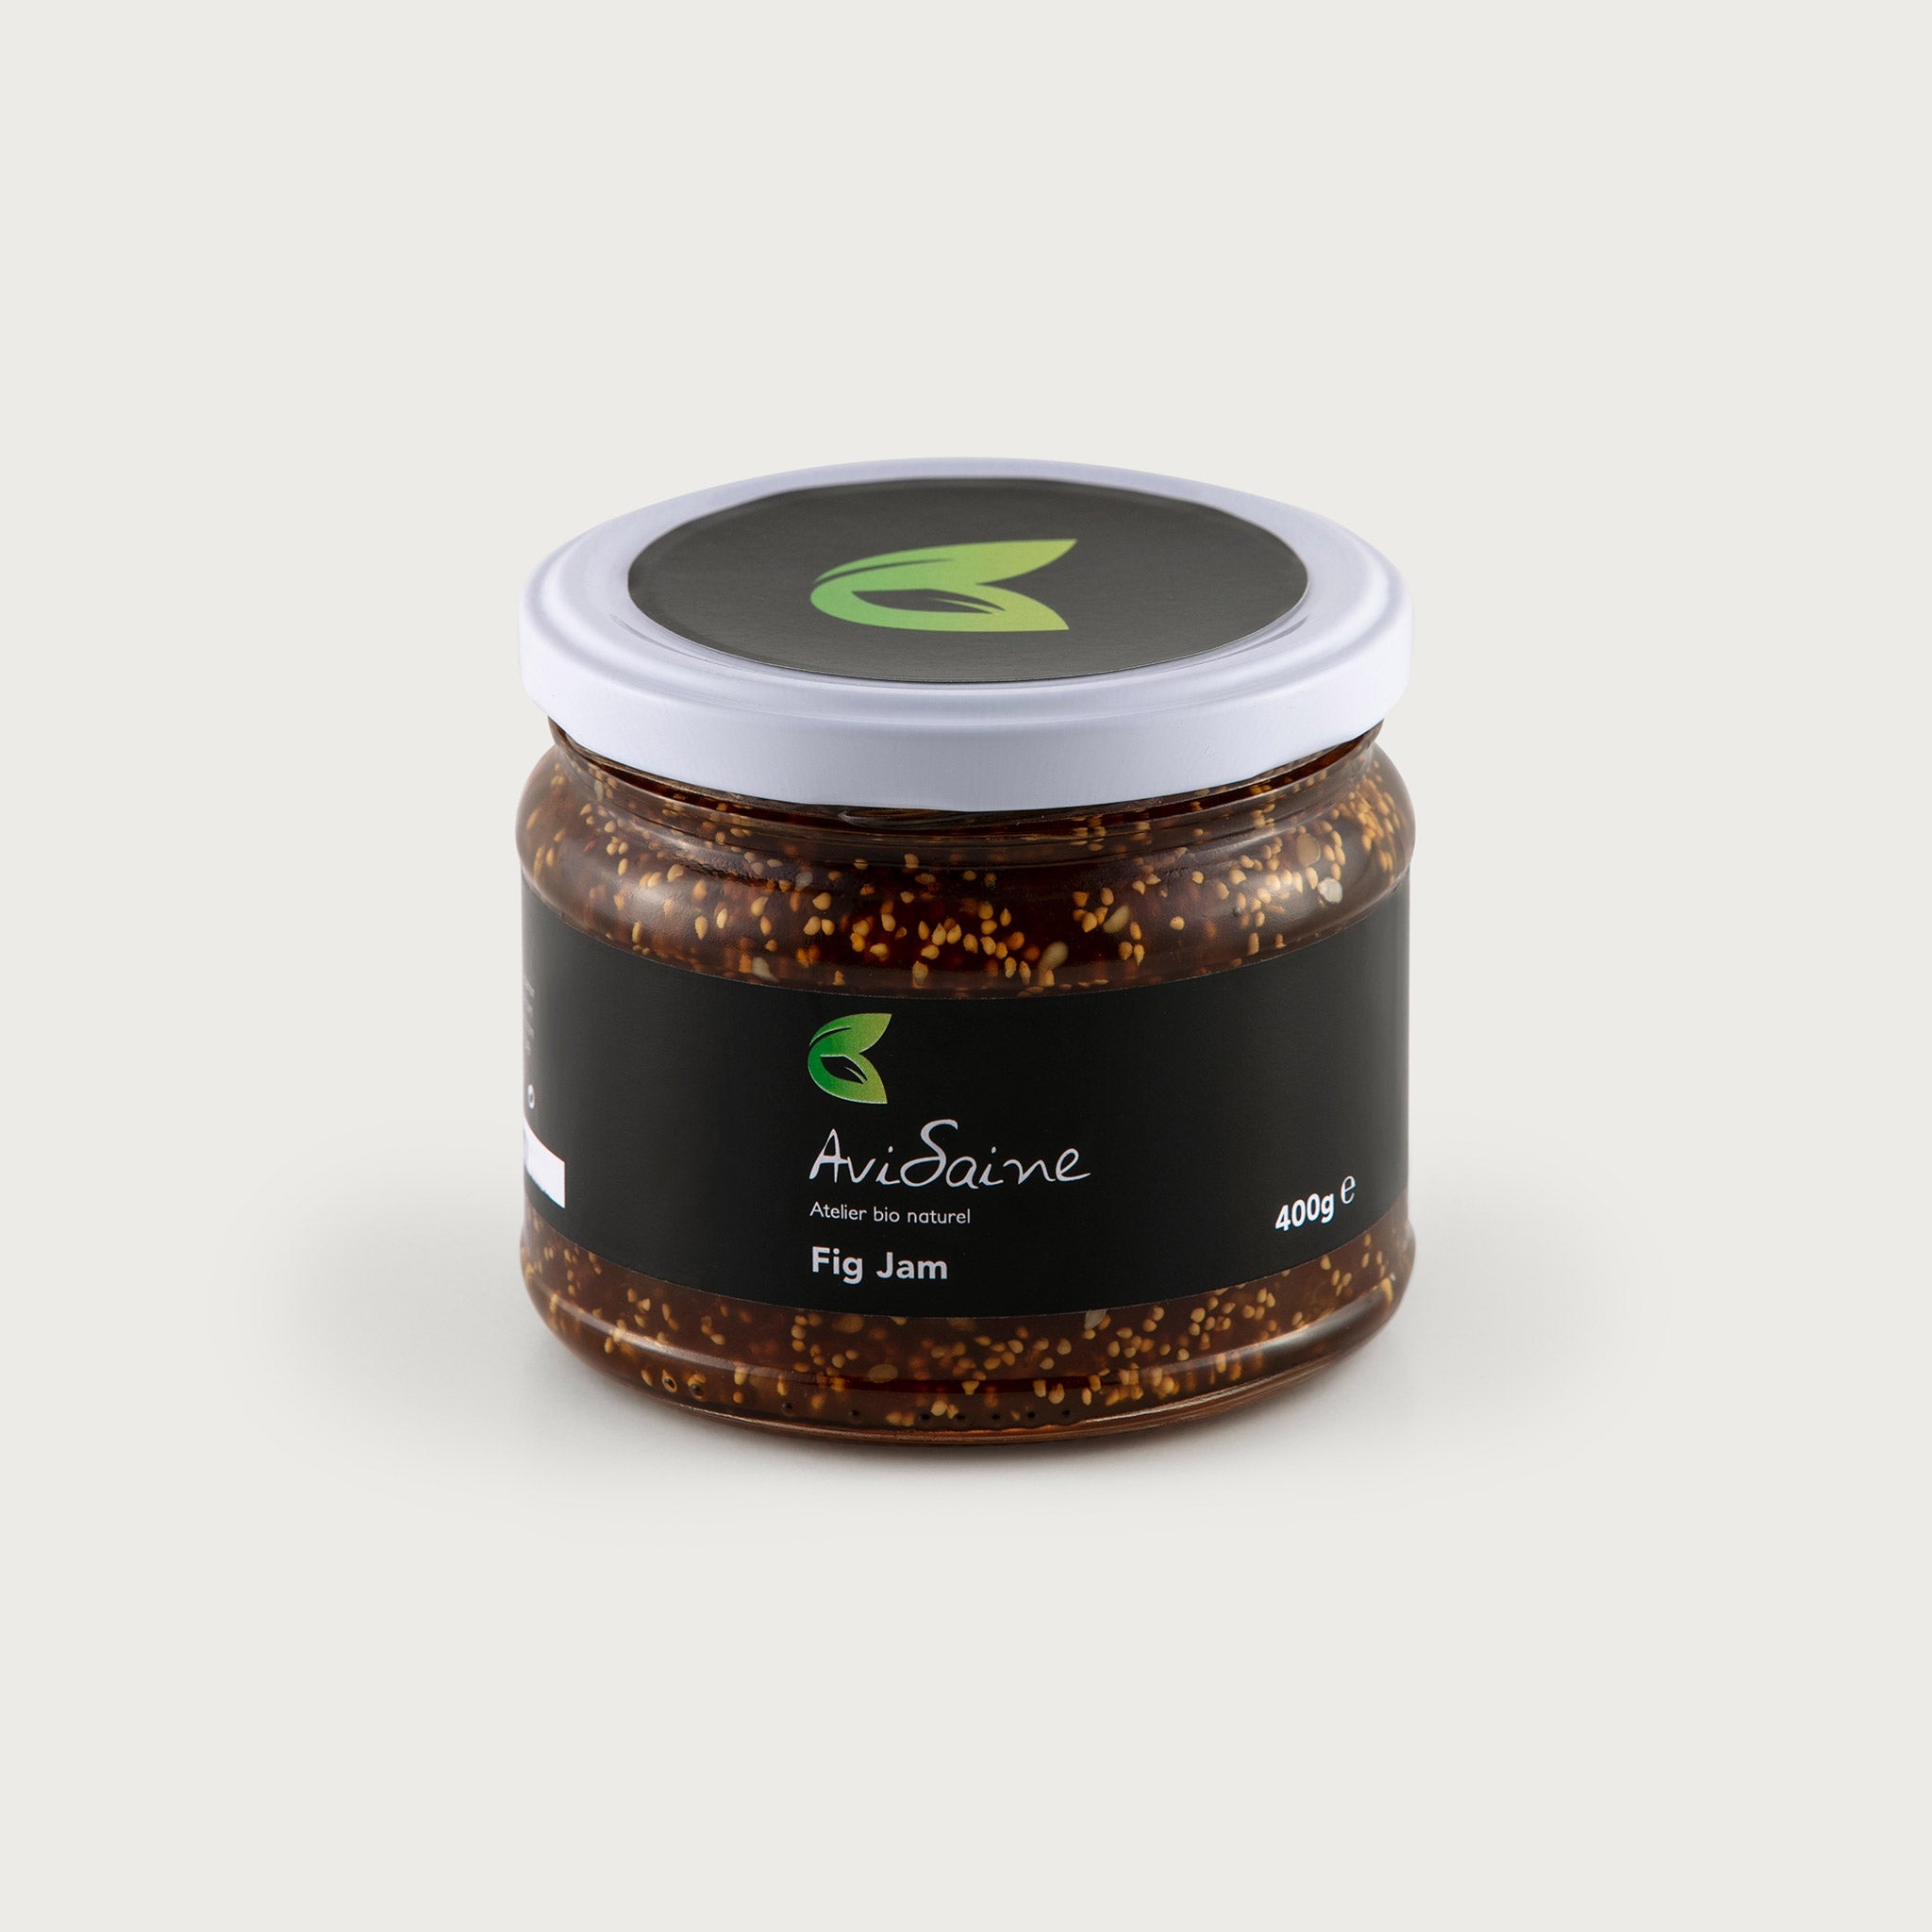 This clear 14 oz. jar of fig jam is rich brown in color with light brown fig seeds visible. The label is black with the green AviSaine logo, simple and modern.